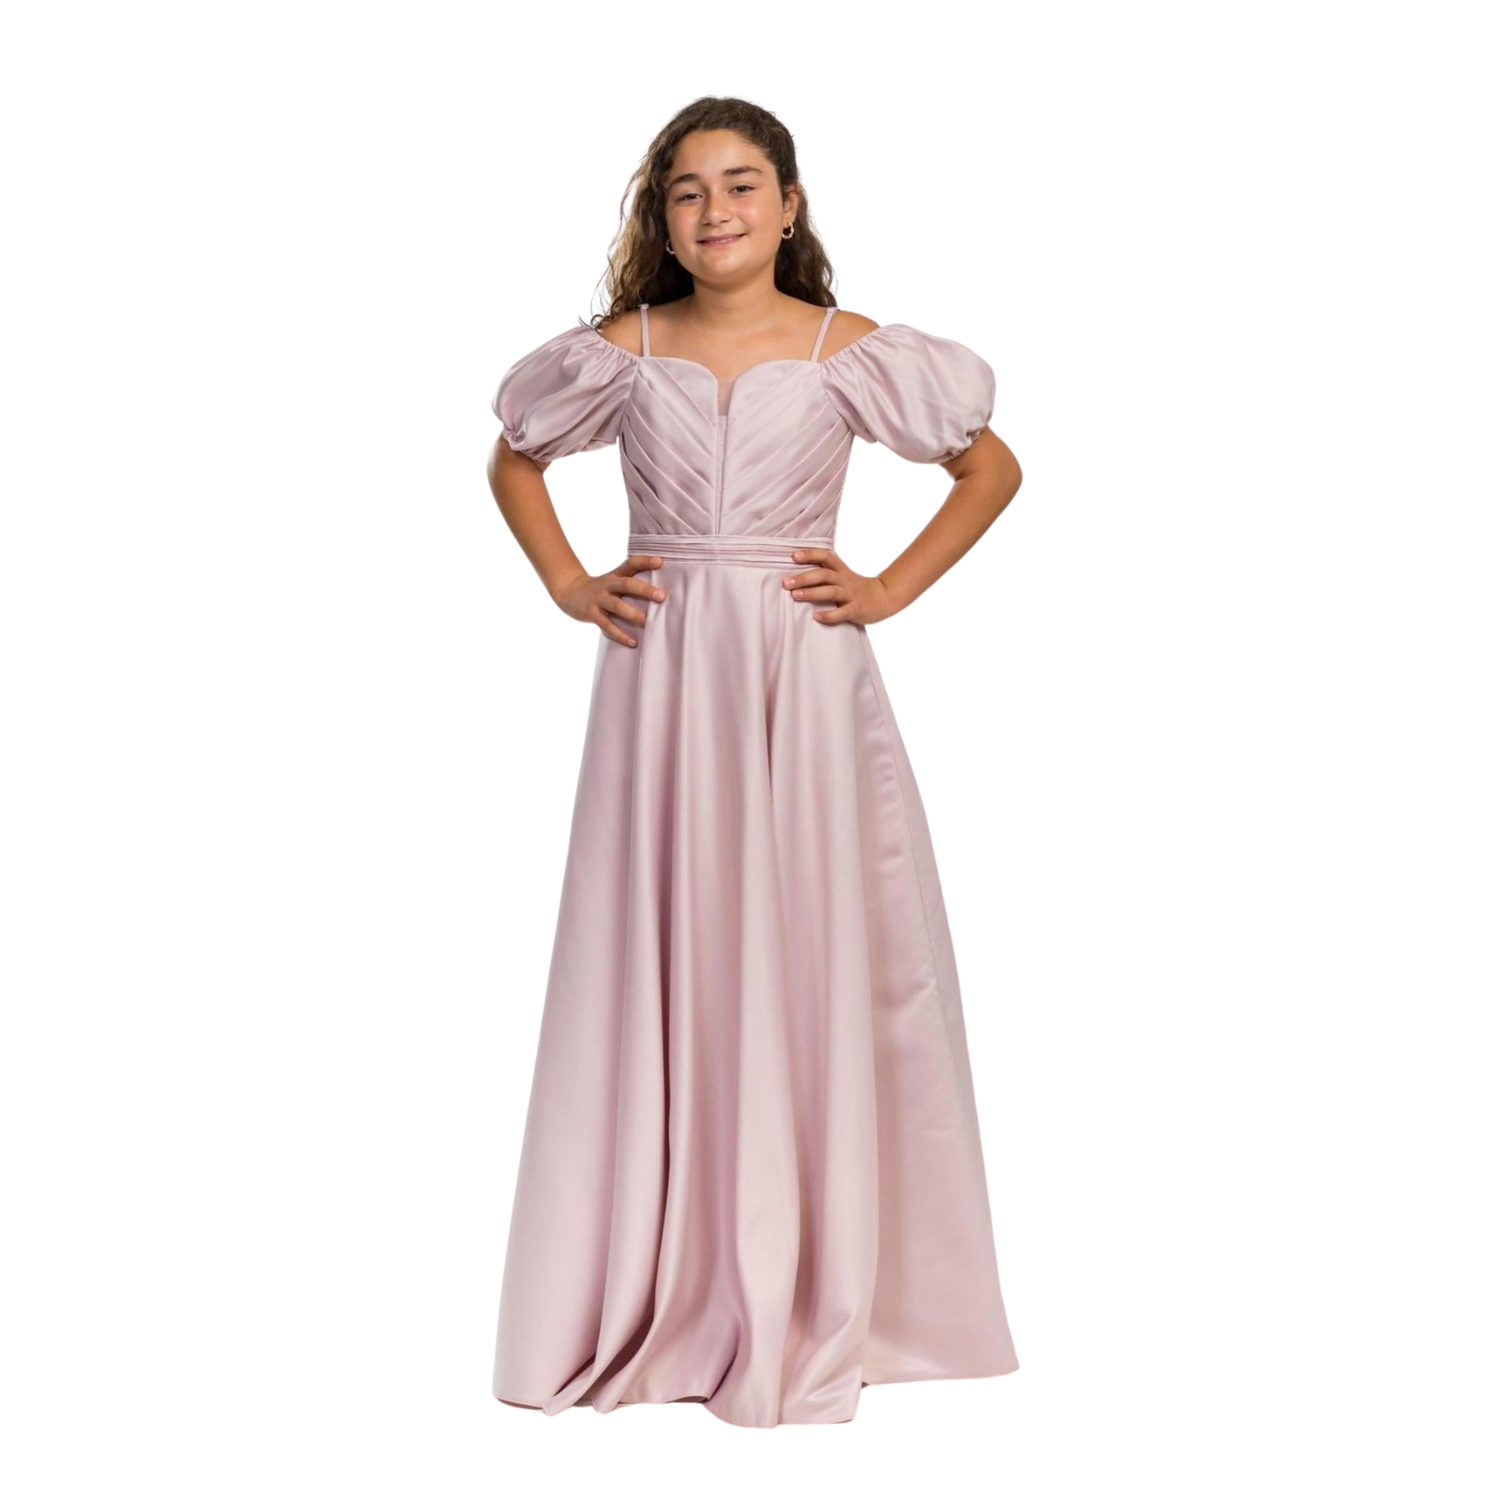 Miss Beautiful Teen Formal Gown